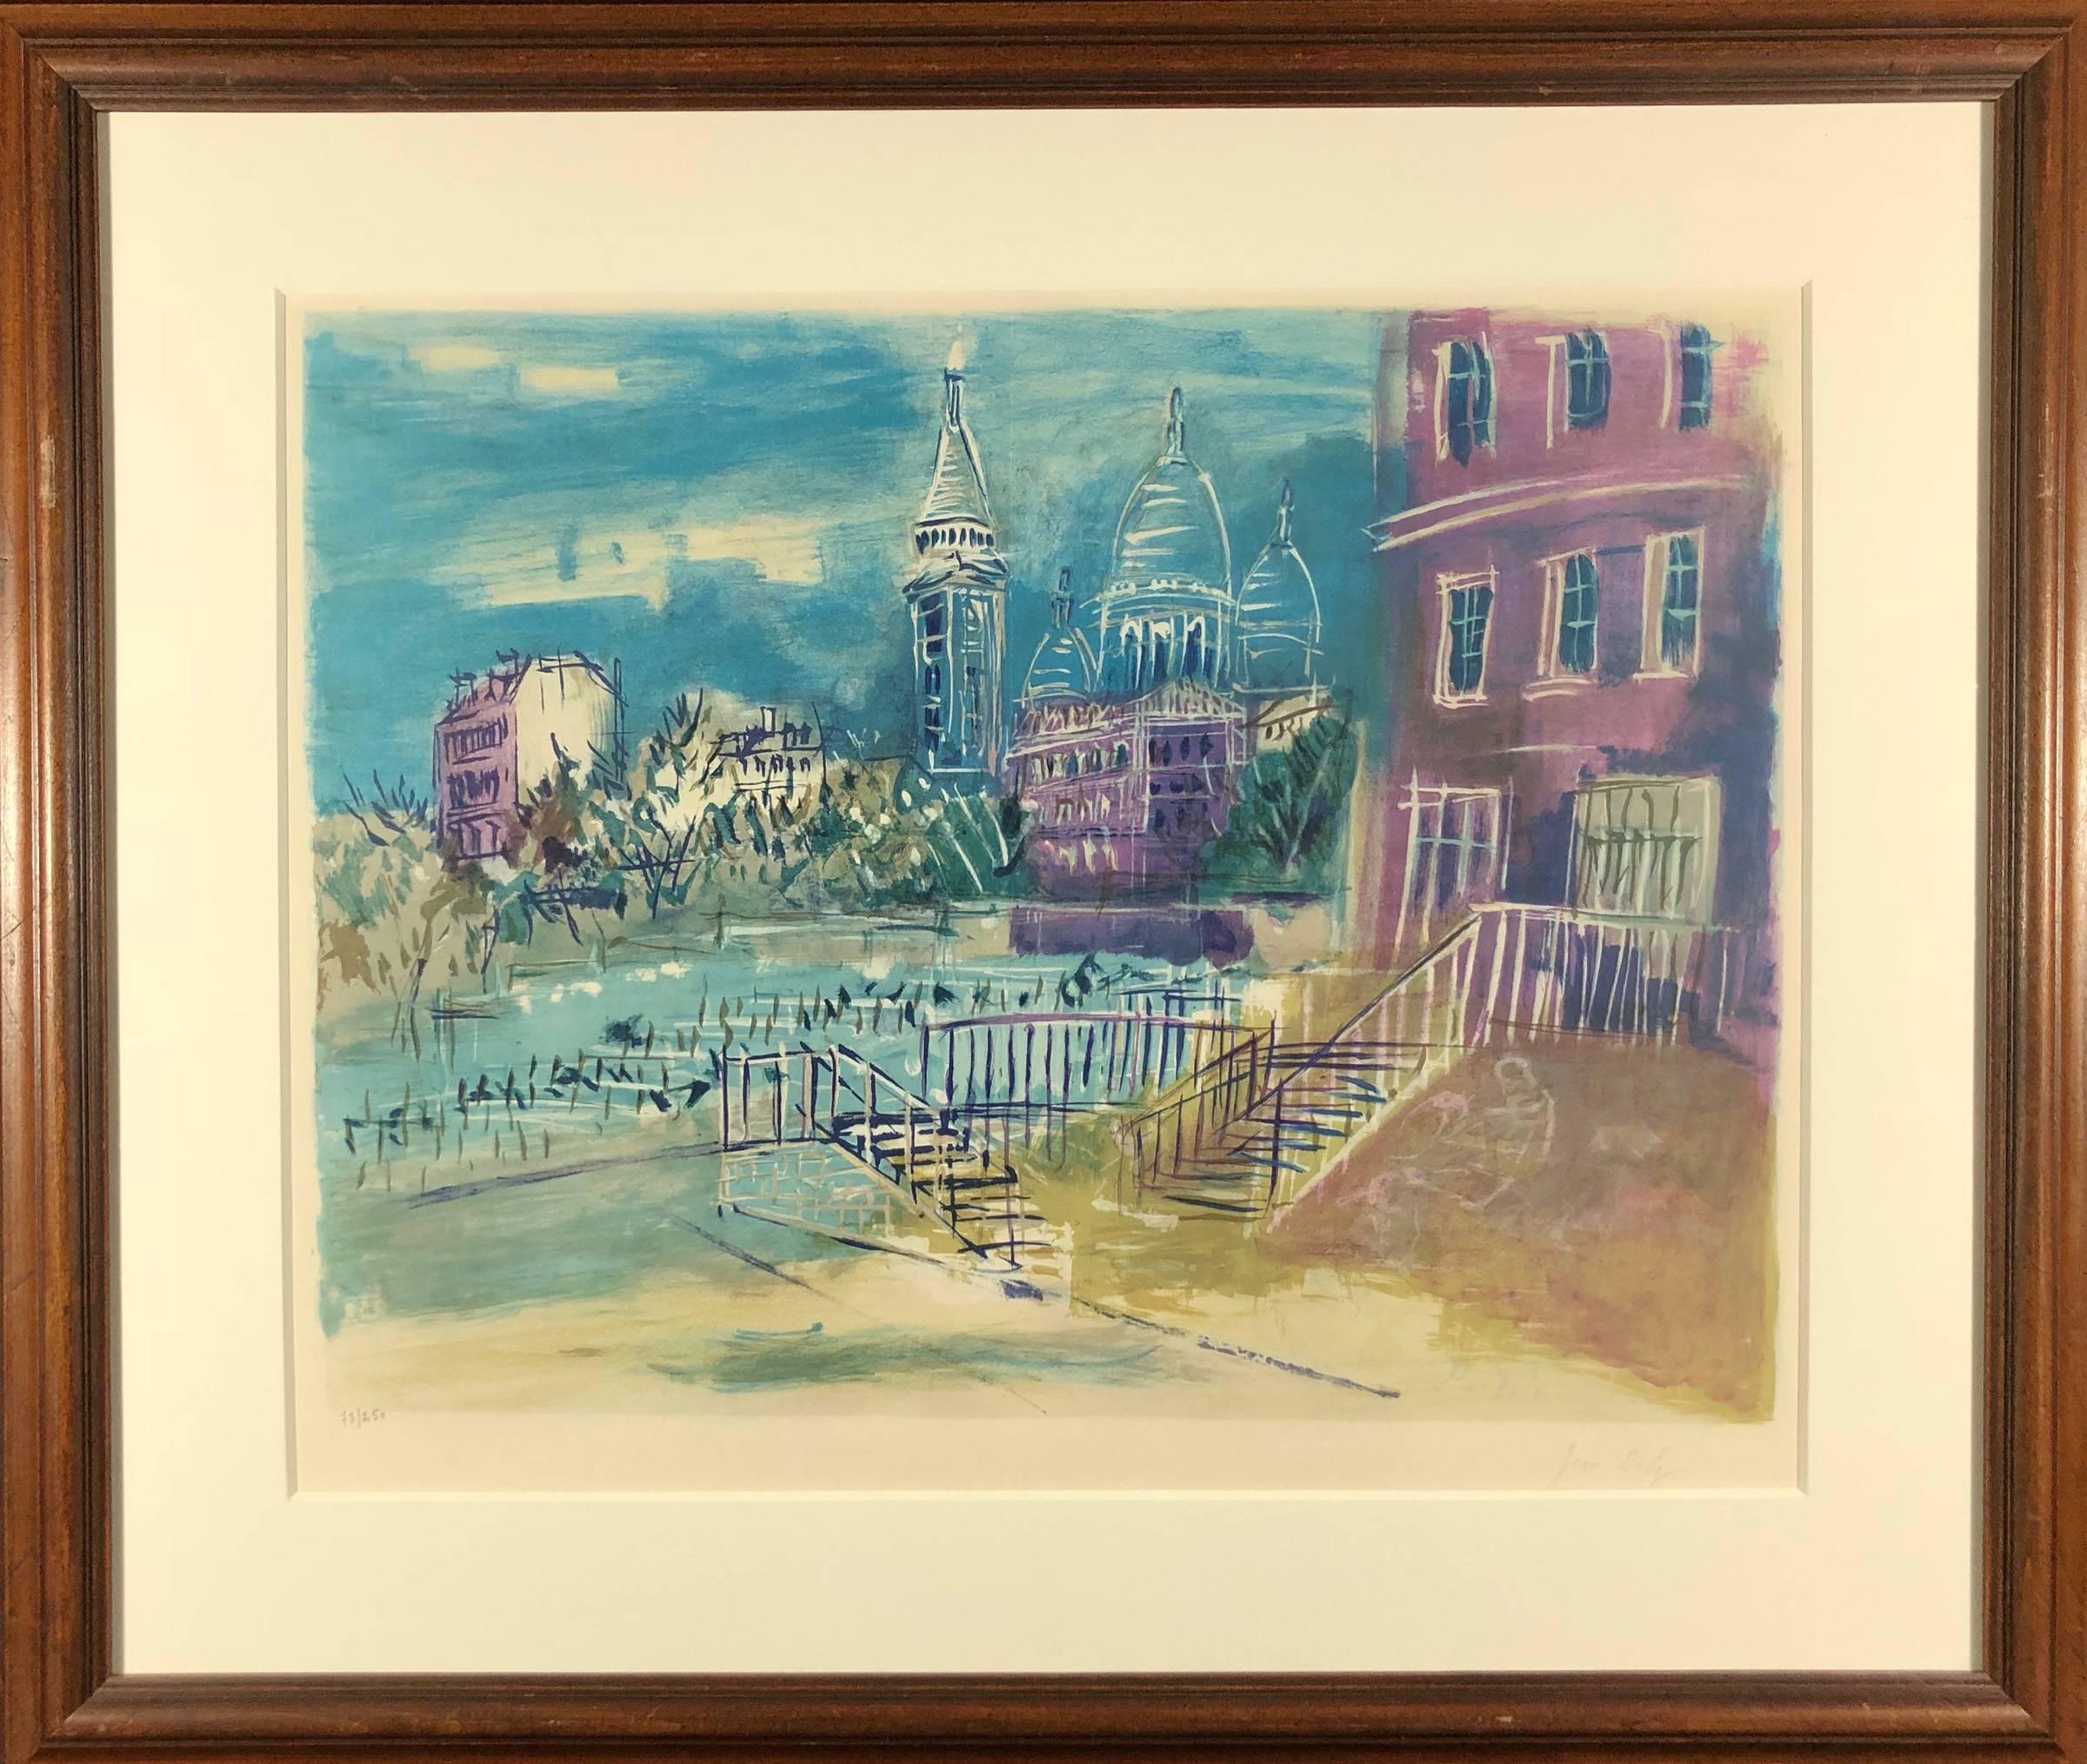 Montmartre at Sacre Coeur - Print by Jean Dufy